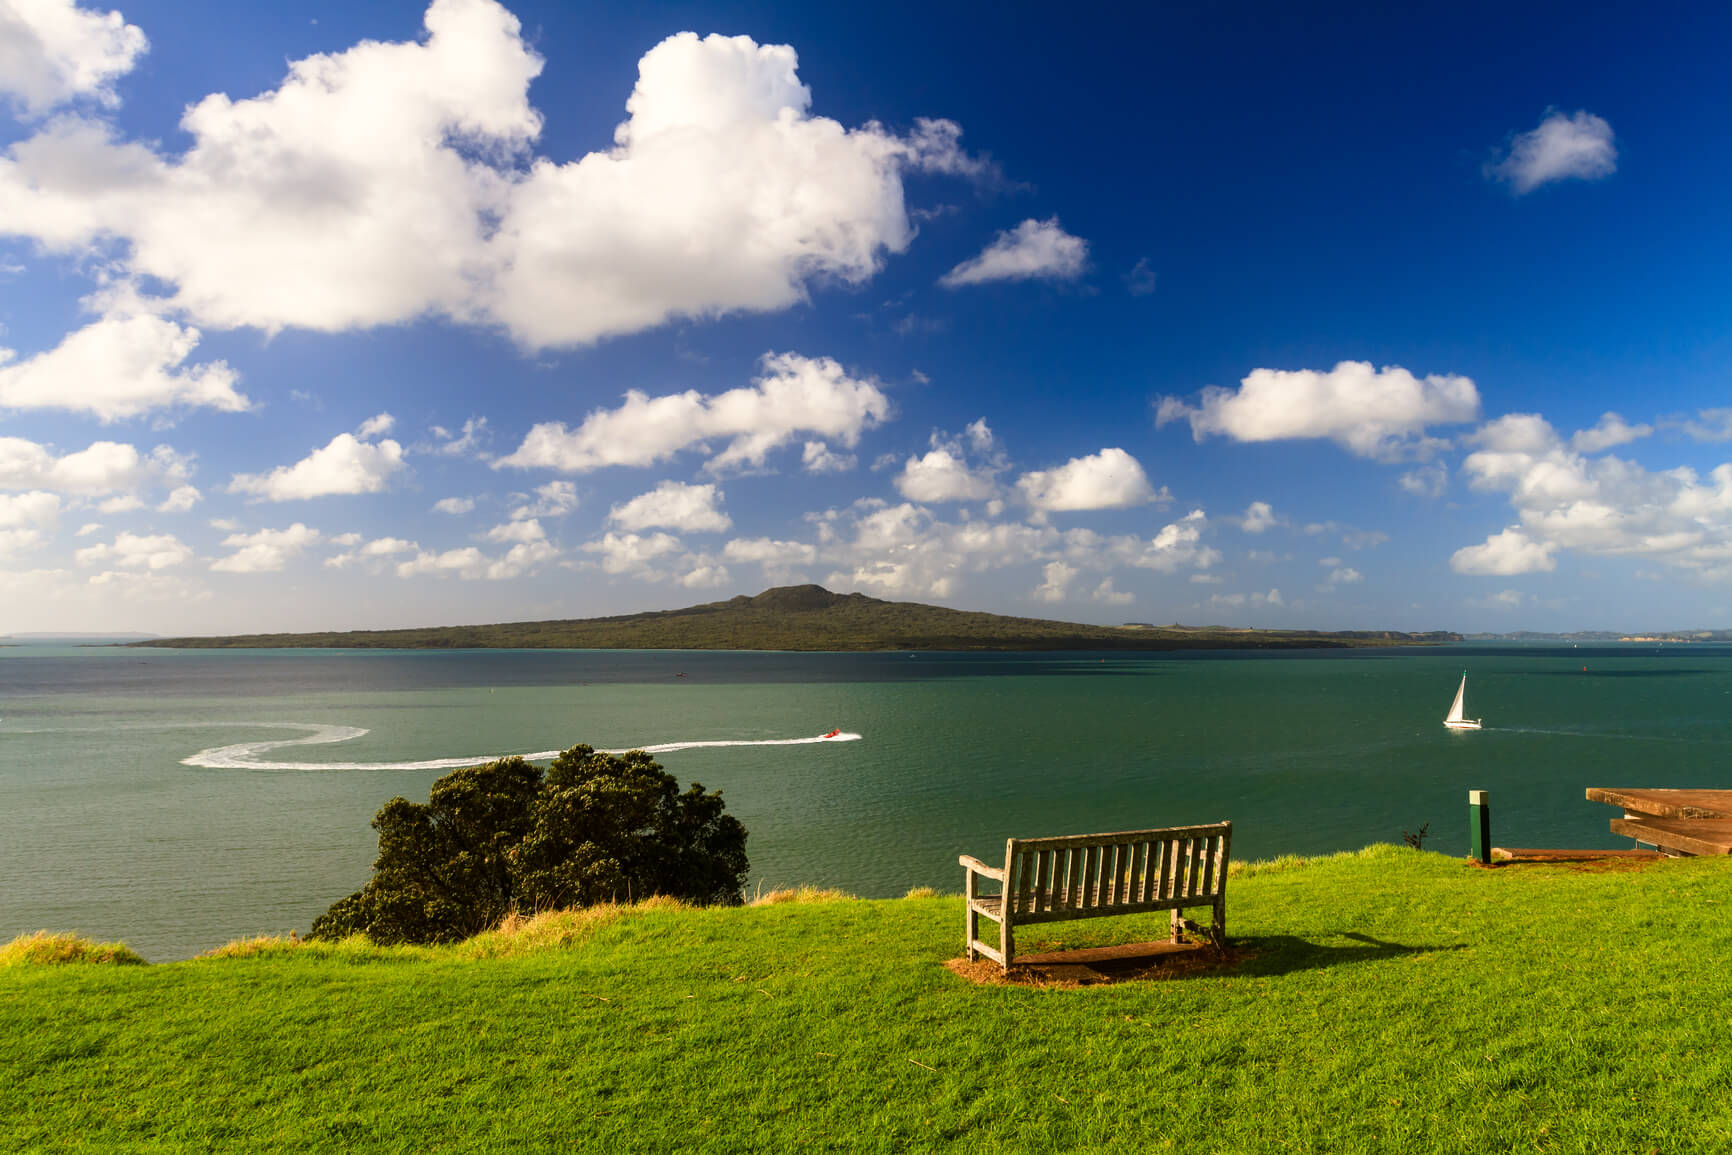 <div class='expired'>EXPIRED</div>Frankfurt, Germany to Auckland, New Zealand for only €571 roundtrip | Secret Flying